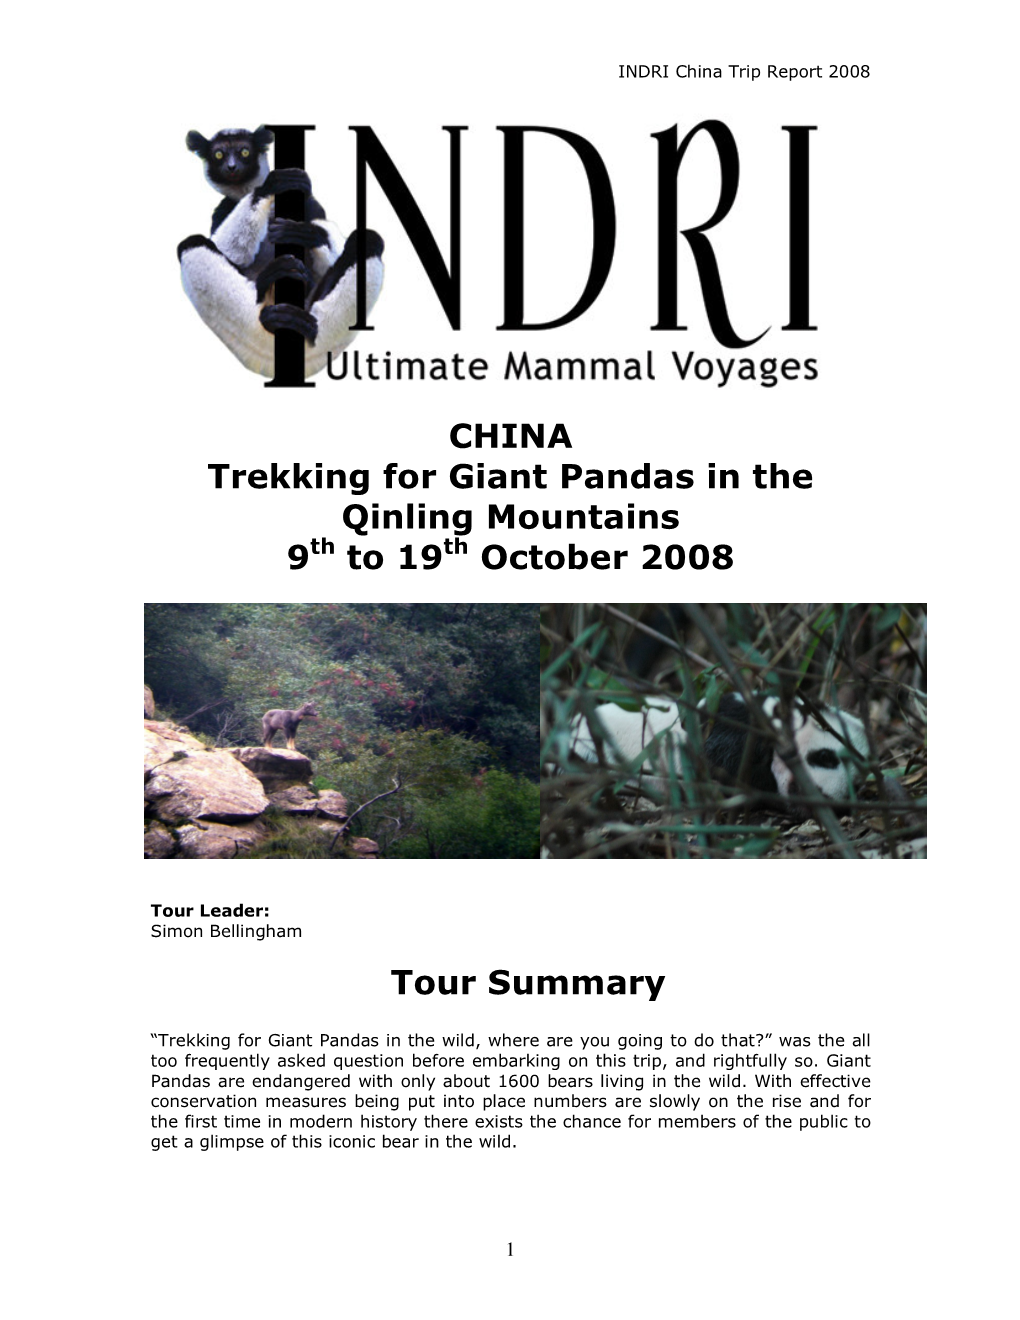 CHINA Trekking for Giant Pandas in the Qinling Mountains 9 to 19